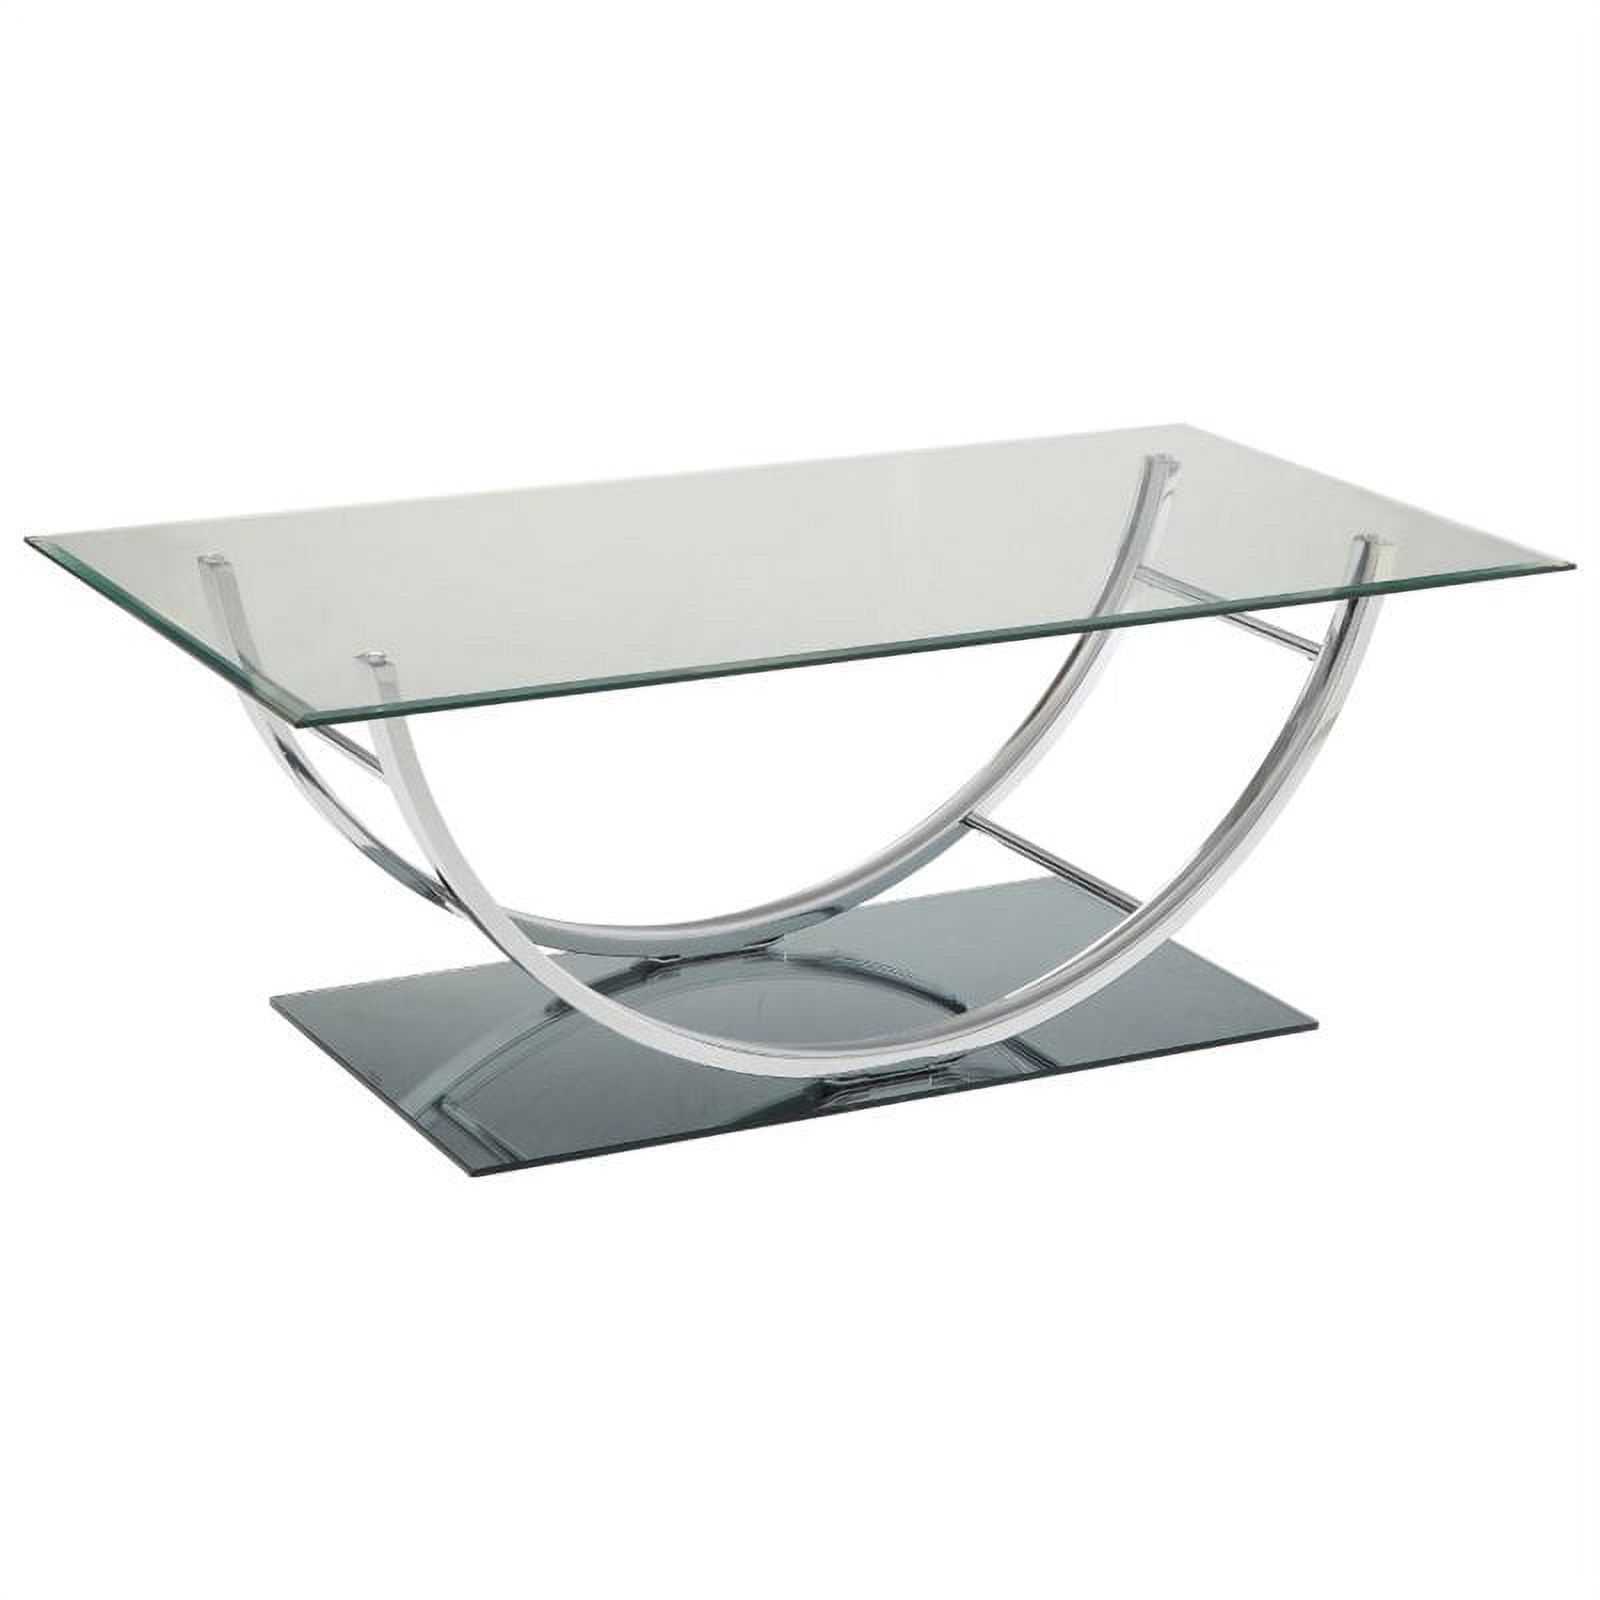 Coaster Contemporary U-Shaped Glass Top Coffee Table in Chrome - image 2 of 4